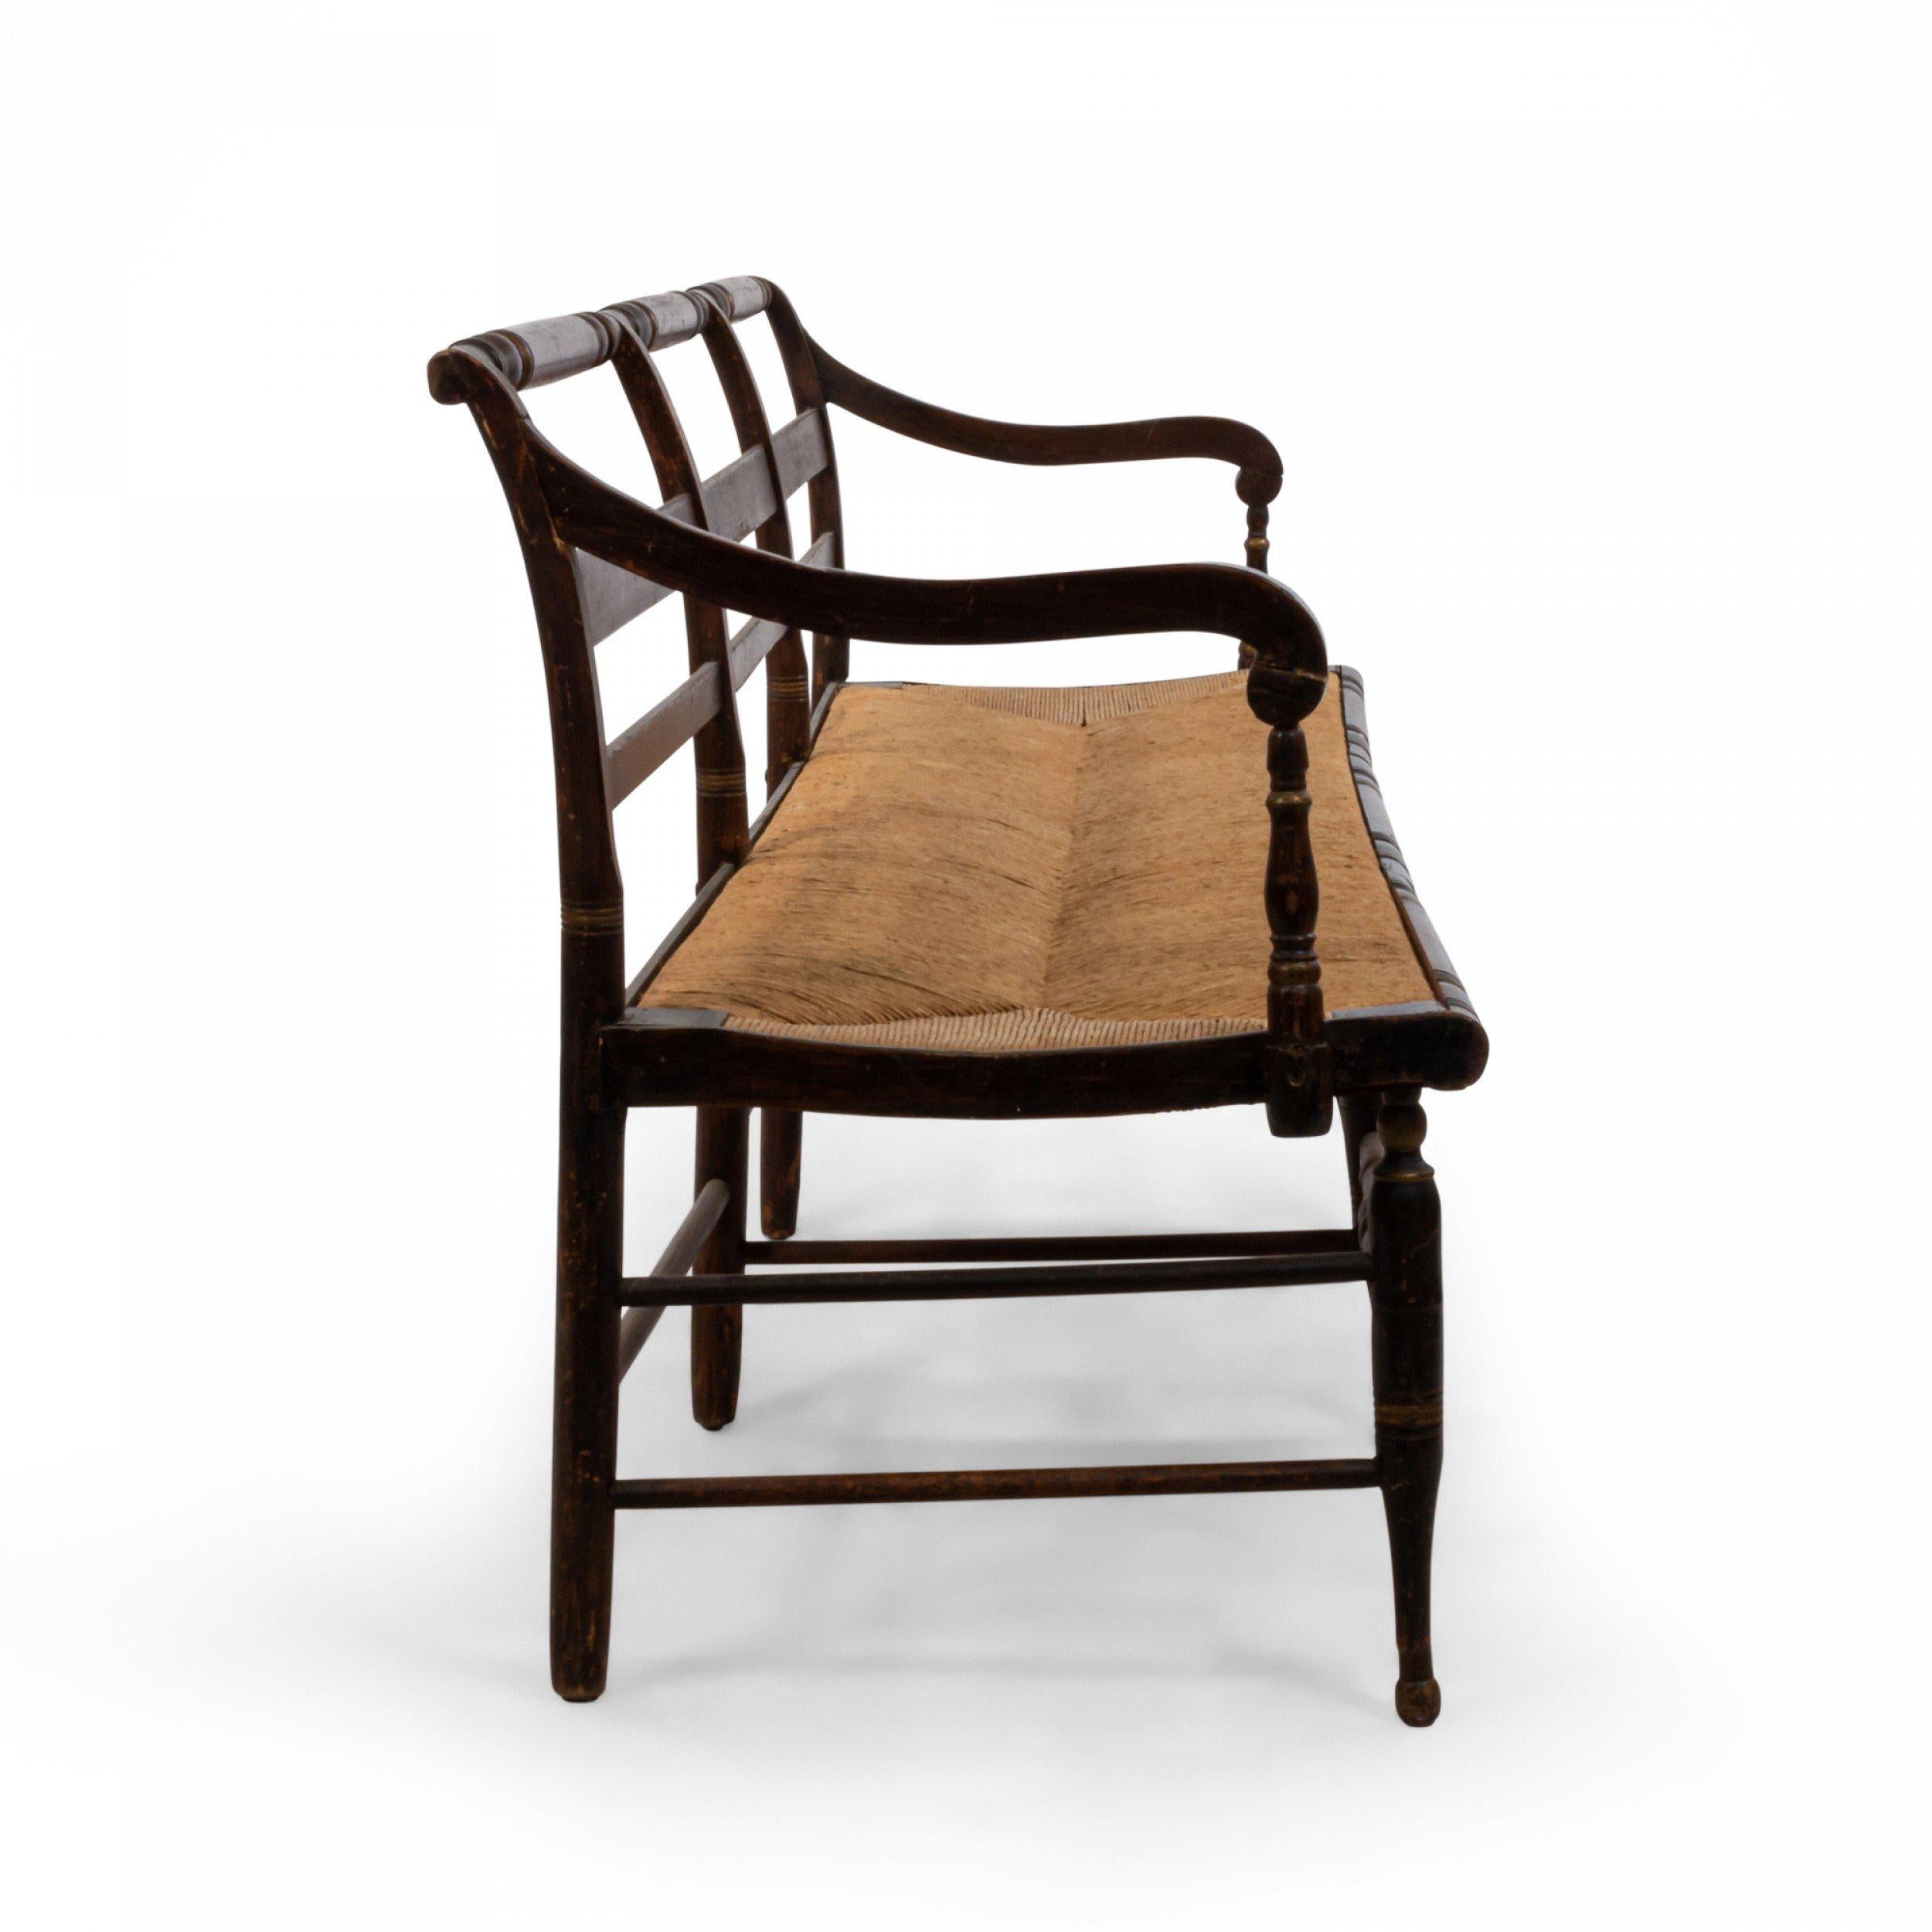 American Federal (First half of the 19th century) dark brown painted and gold stencil decorated bench with ladder back and rush seat supported on eight turned legs connected with a stretcher.